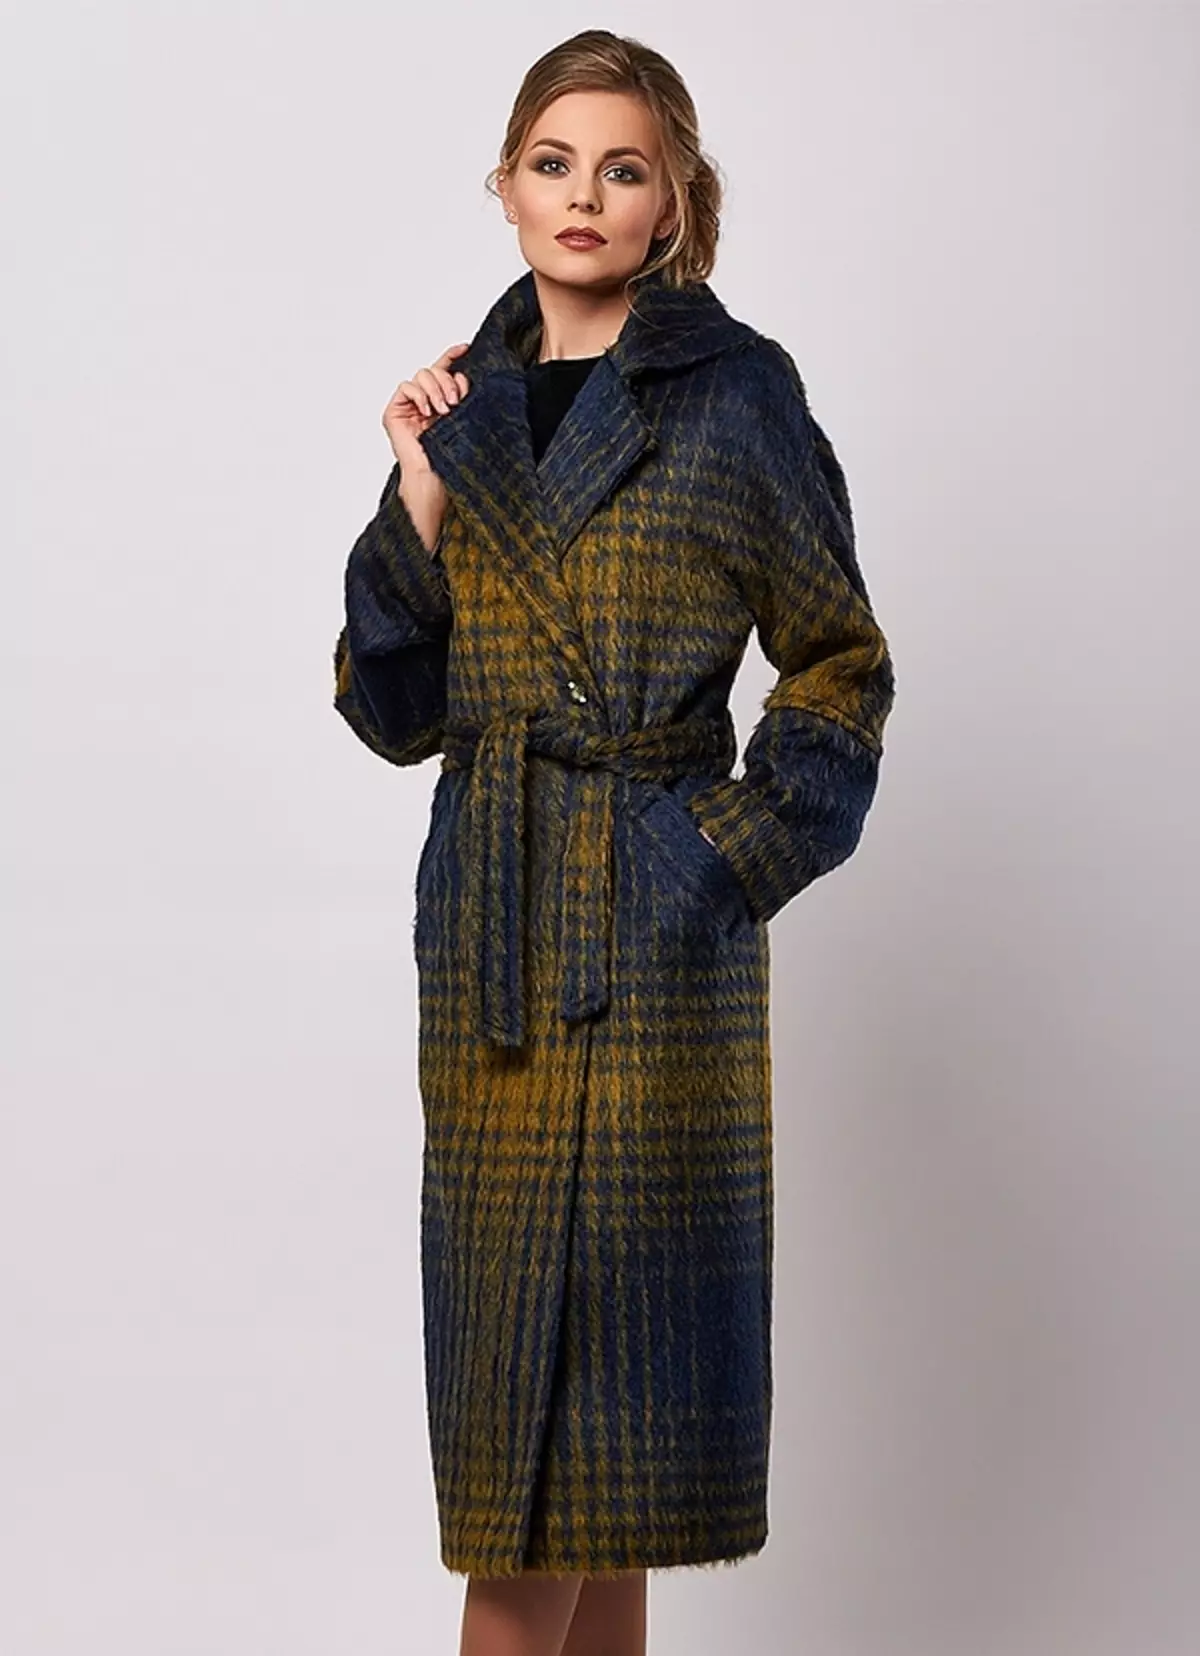 Personne Coat (30 larawan): Female luxury models from person 351_6